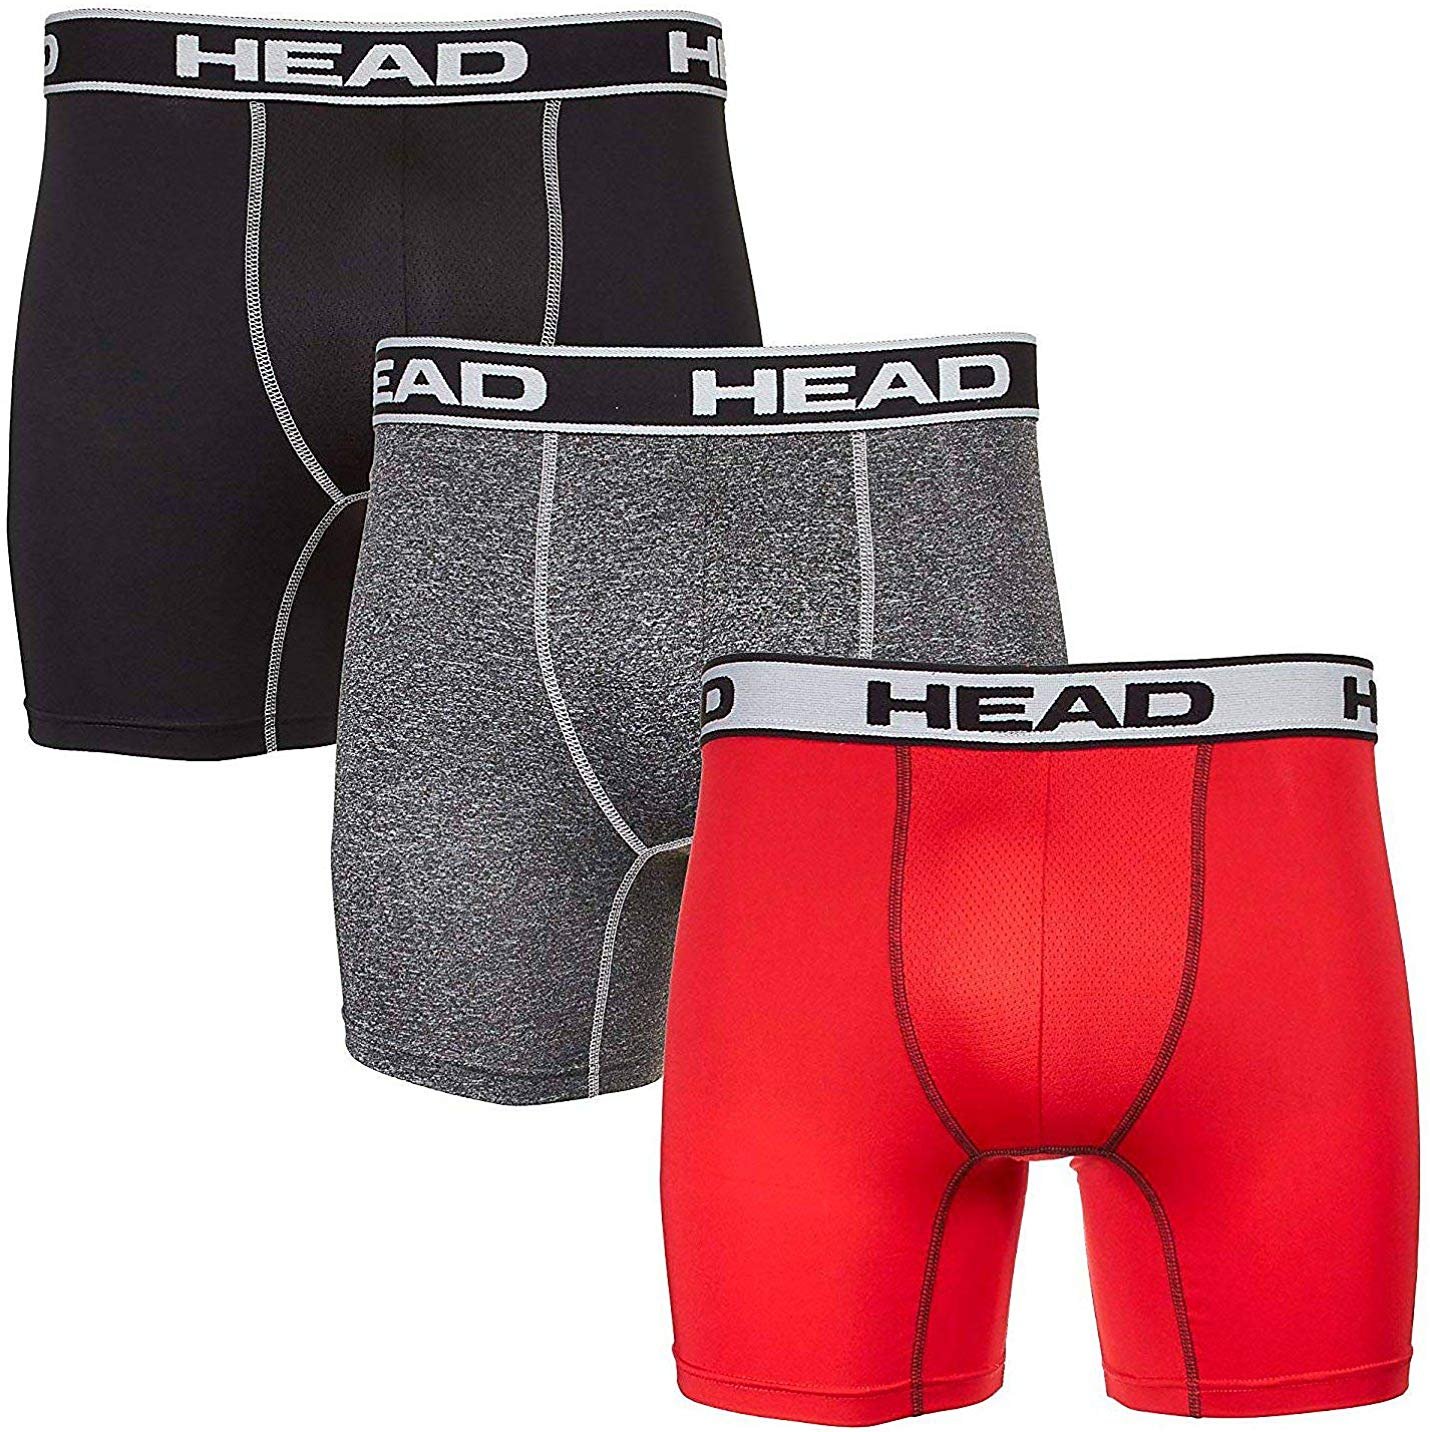 RedHead Performance Printed Boxer Briefs for Men 2-Pack